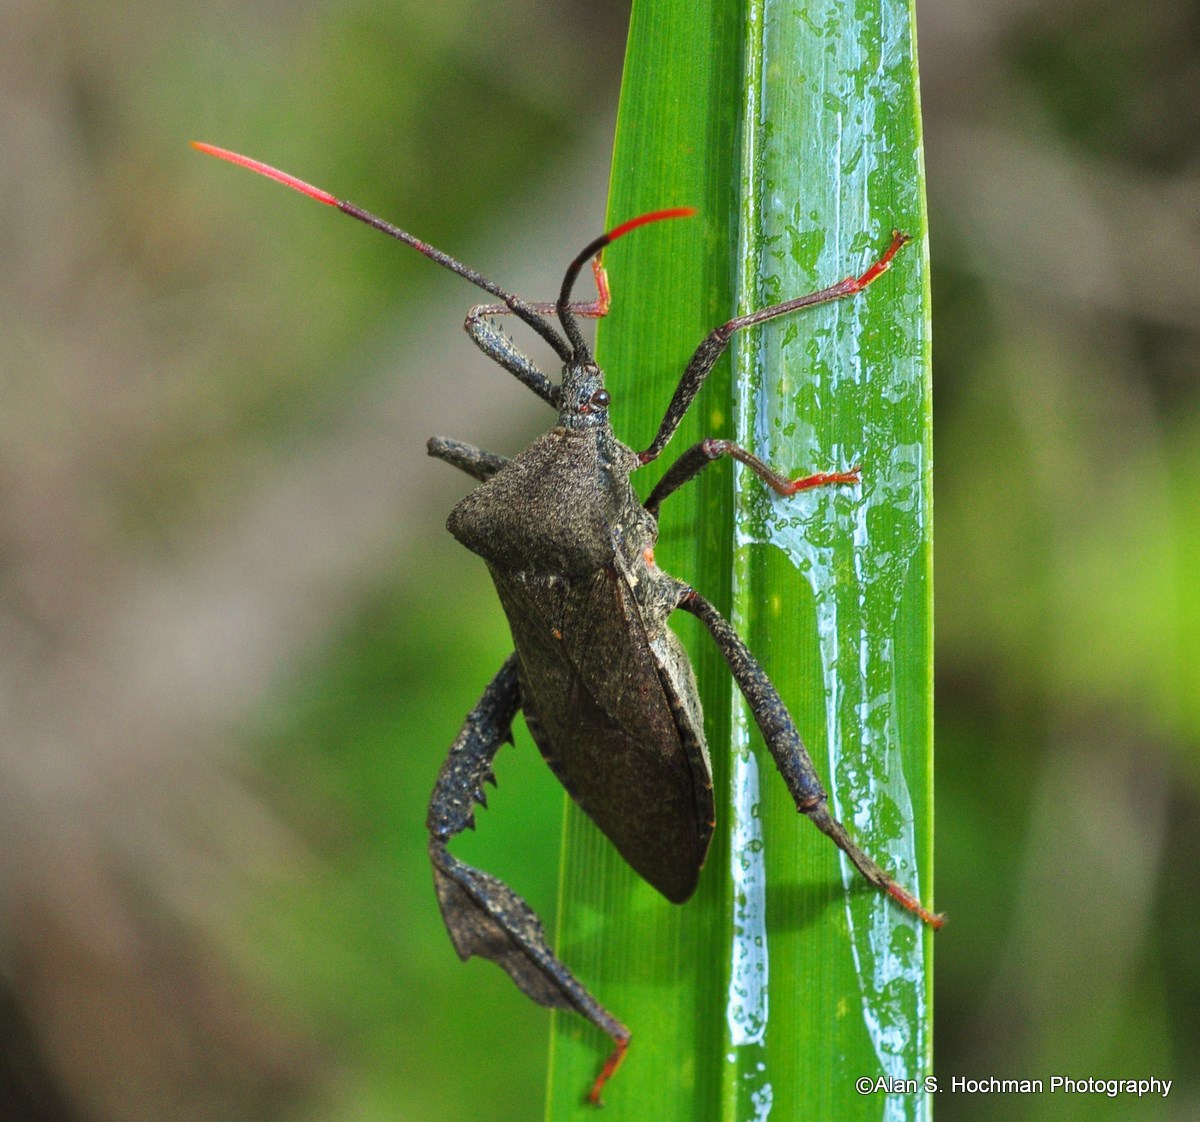 "Florida Leaf-Footed Bug on blade of grass in Big Cypress National Reserve"